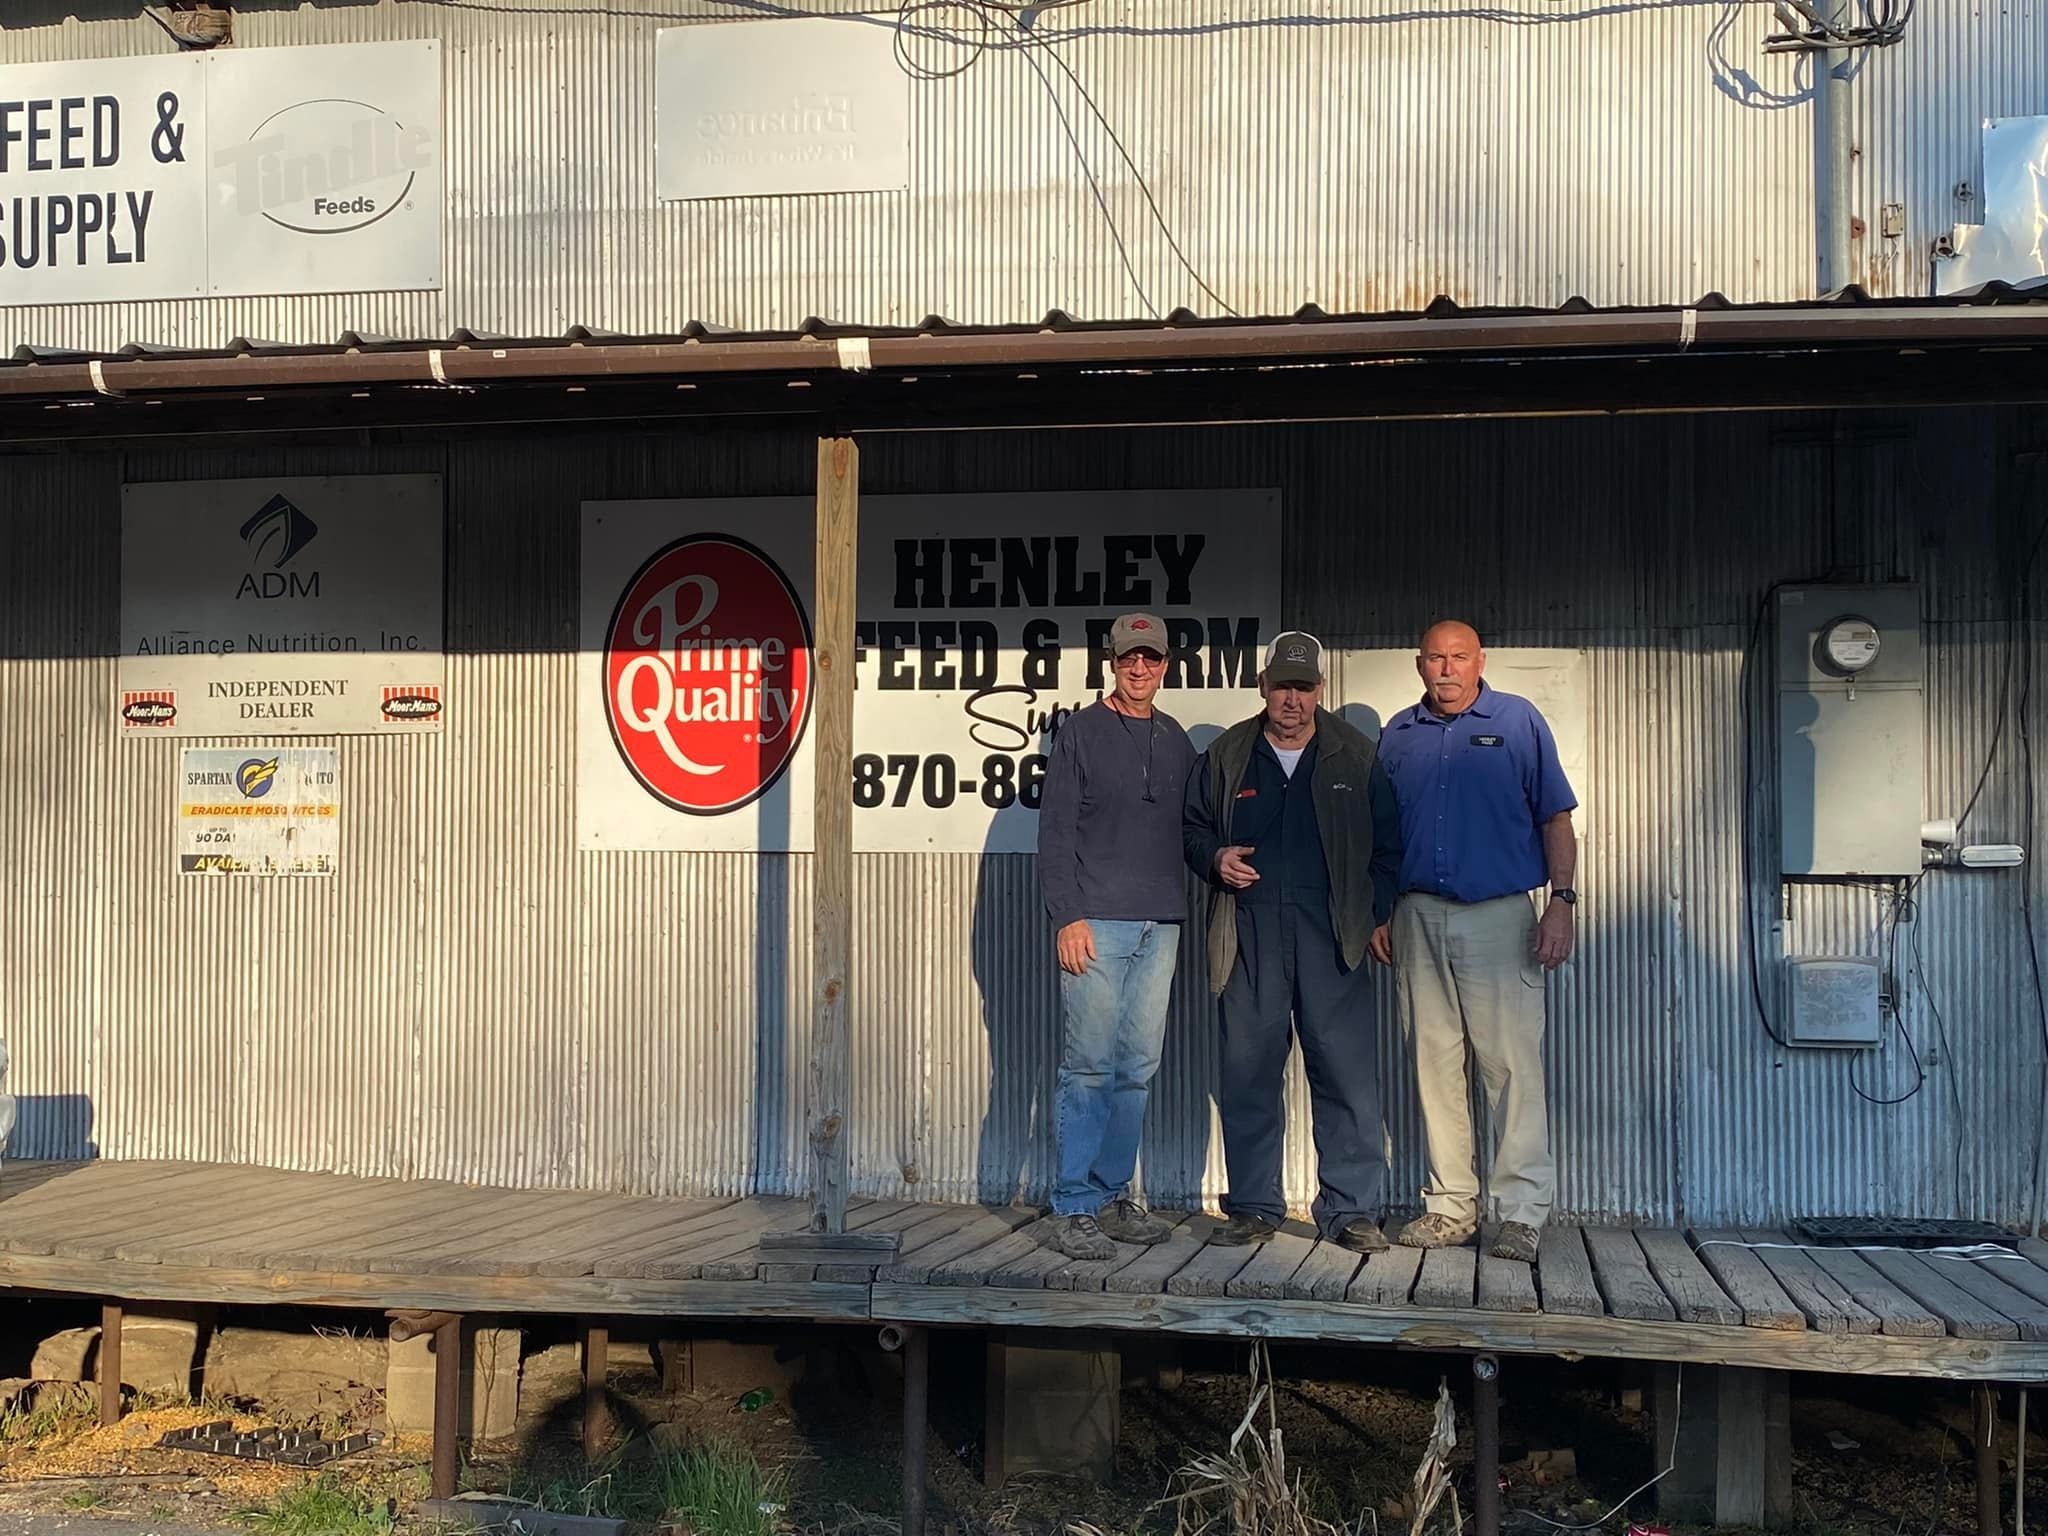 Patt, Buddy, and Ray Henley Founders of Henley Feed